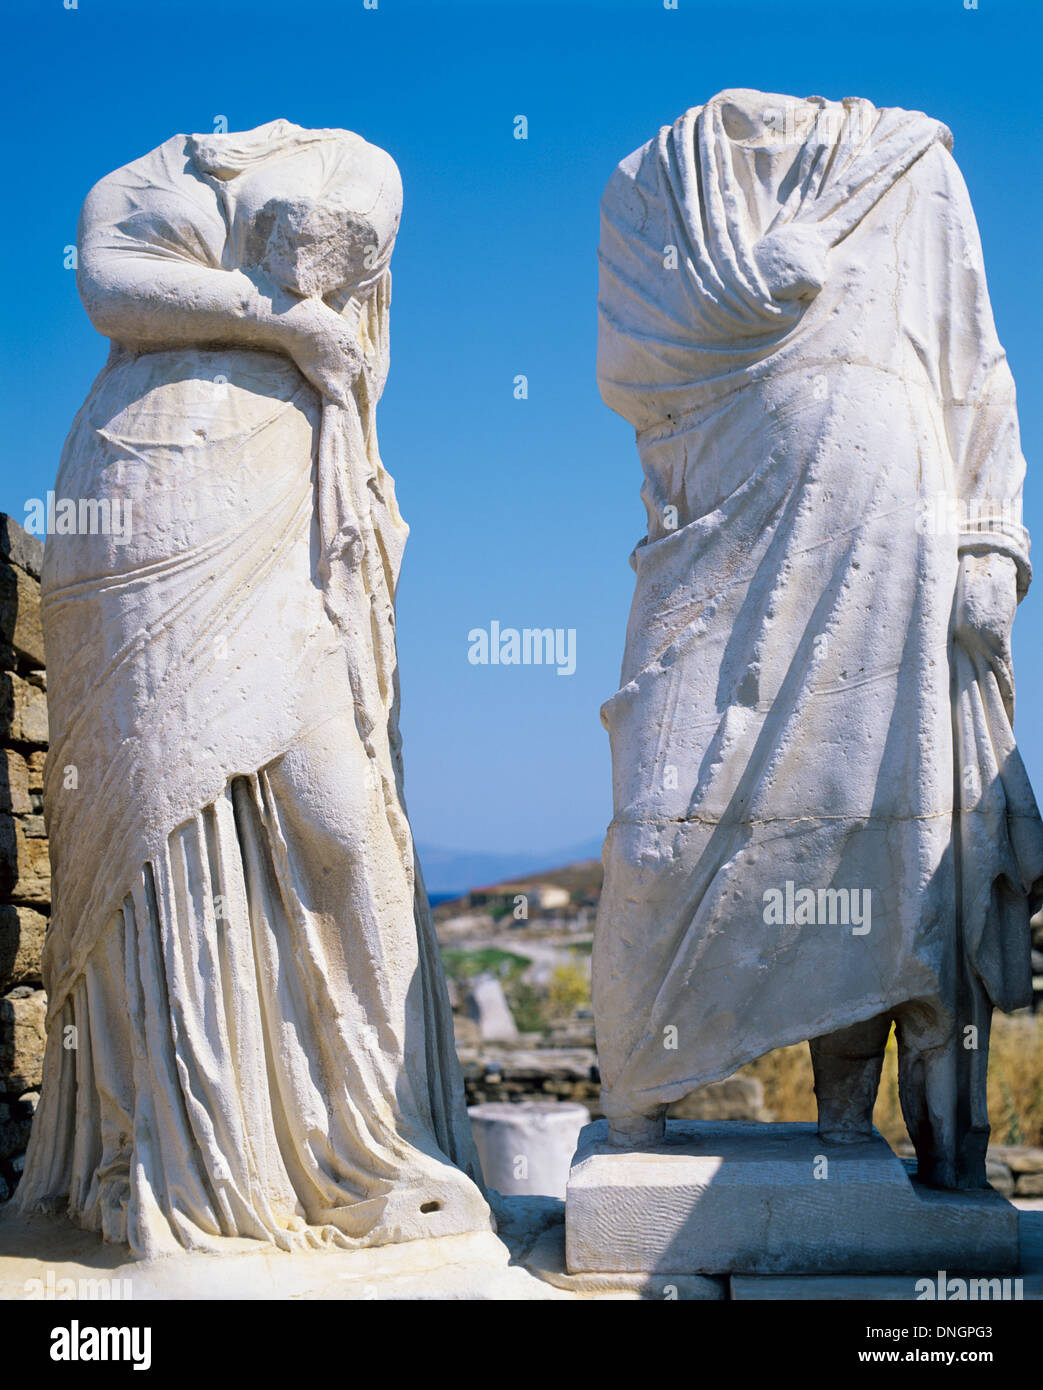 Headless statues of Cleopatra and Dioscurides at the House of Cleopatra, Delos, Greece Stock Photo